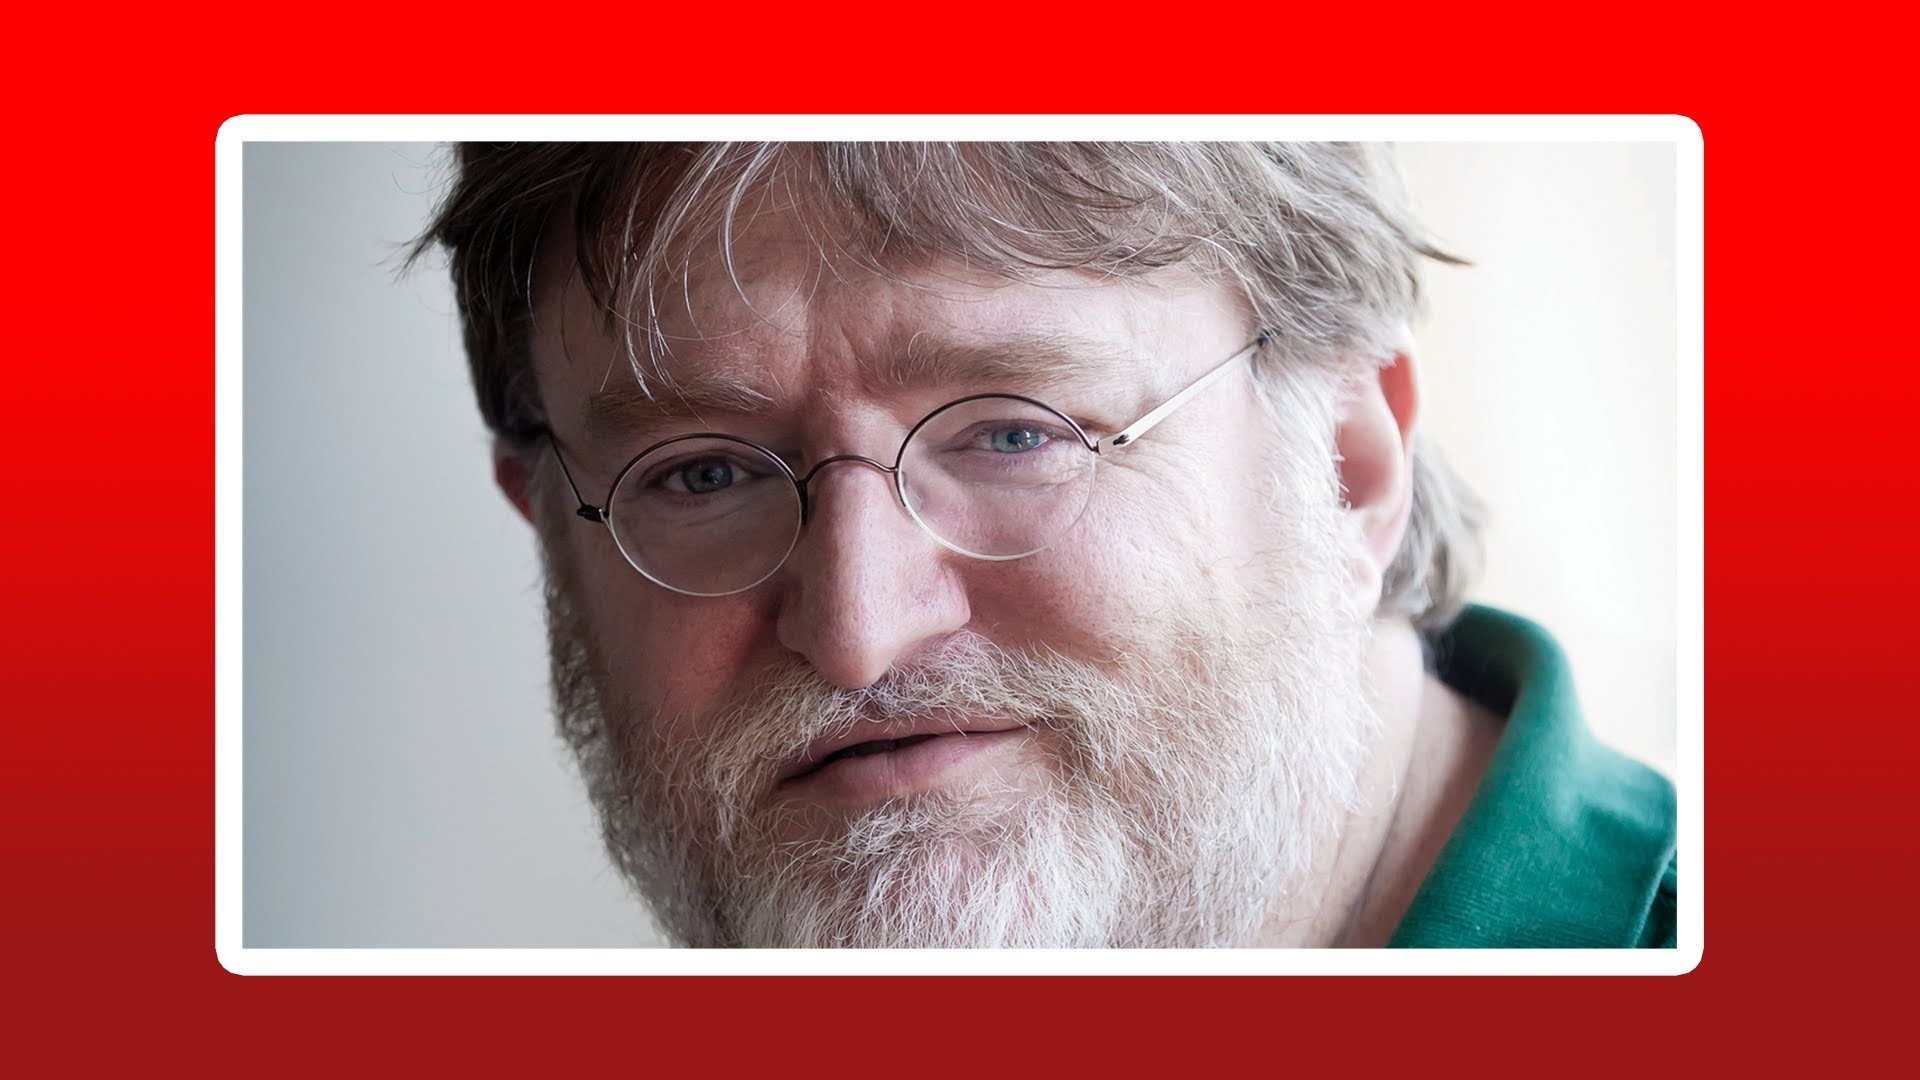 1920x1080 Ode to Gabe Newell - A PC Gamers Christmas Carol